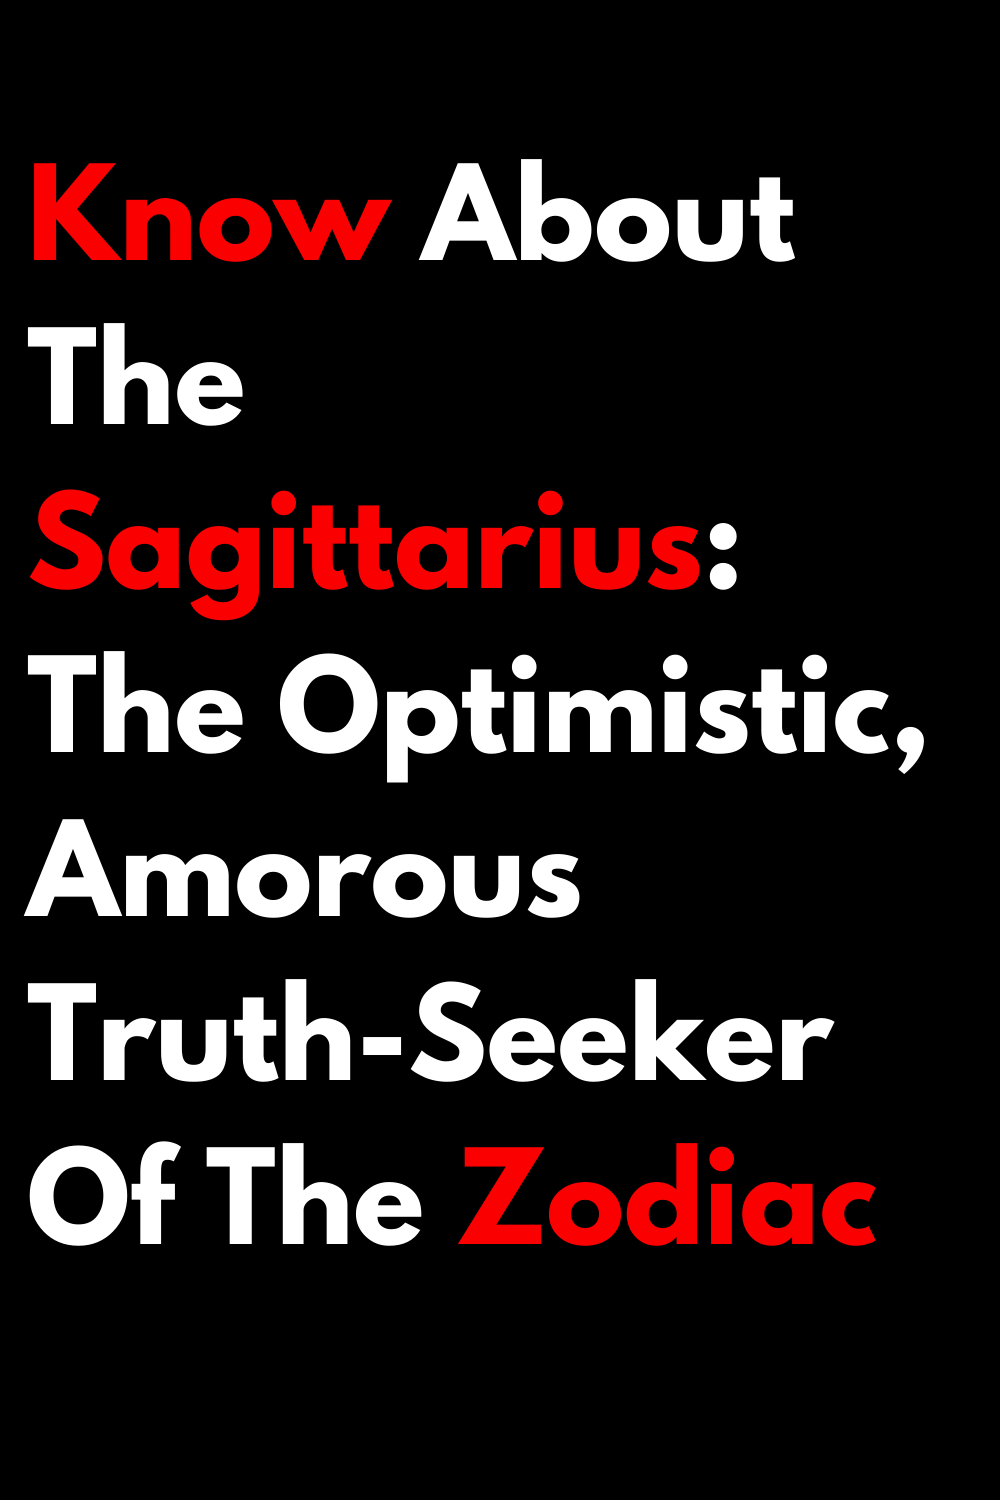 Know About The Sagittarius: The Optimistic, Amorous Truth-Seeker Of The Zodiac